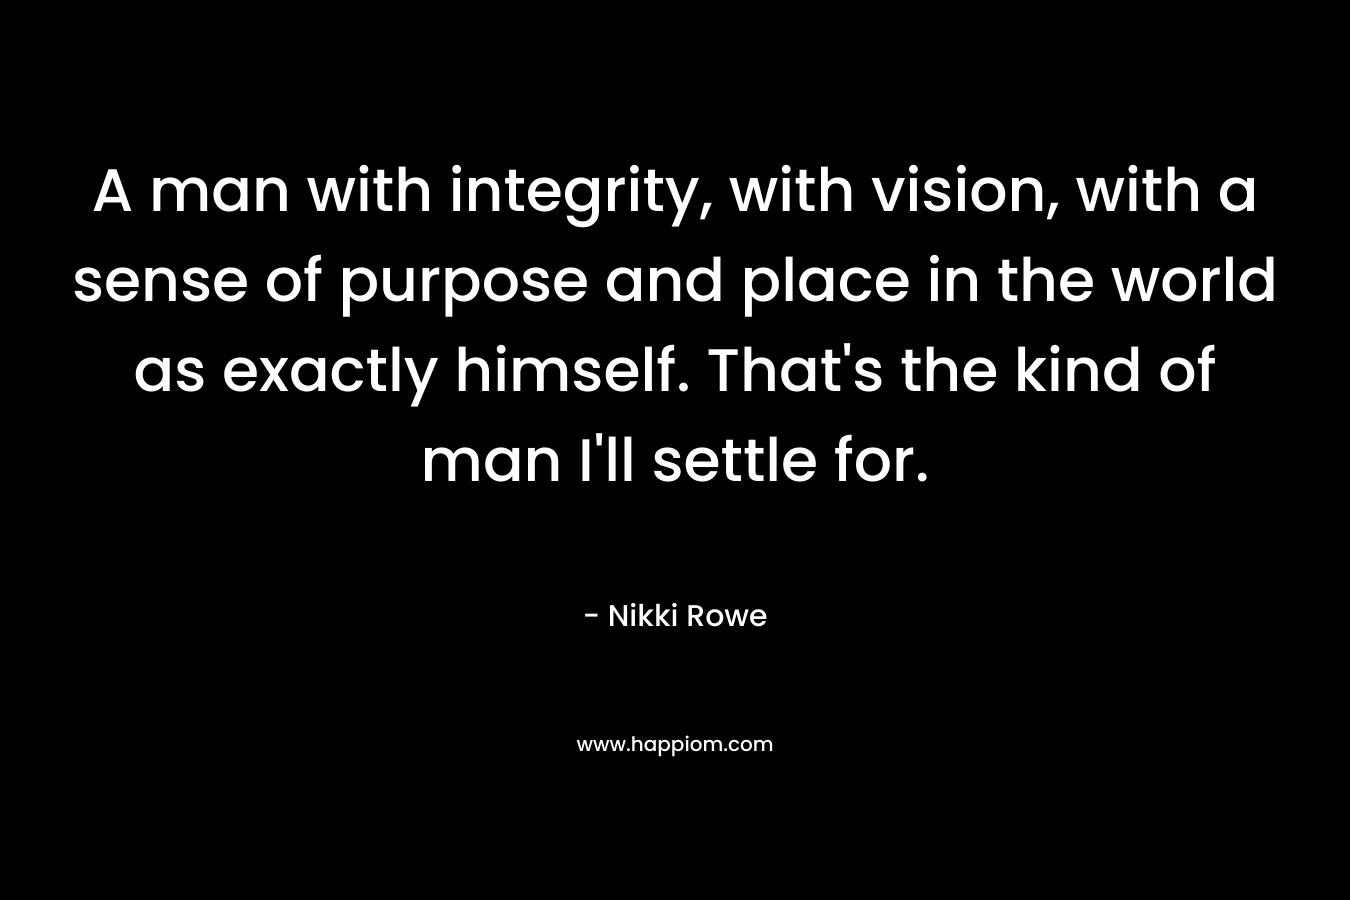 A man with integrity, with vision, with a sense of purpose and place in the world as exactly himself. That's the kind of man I'll settle for.